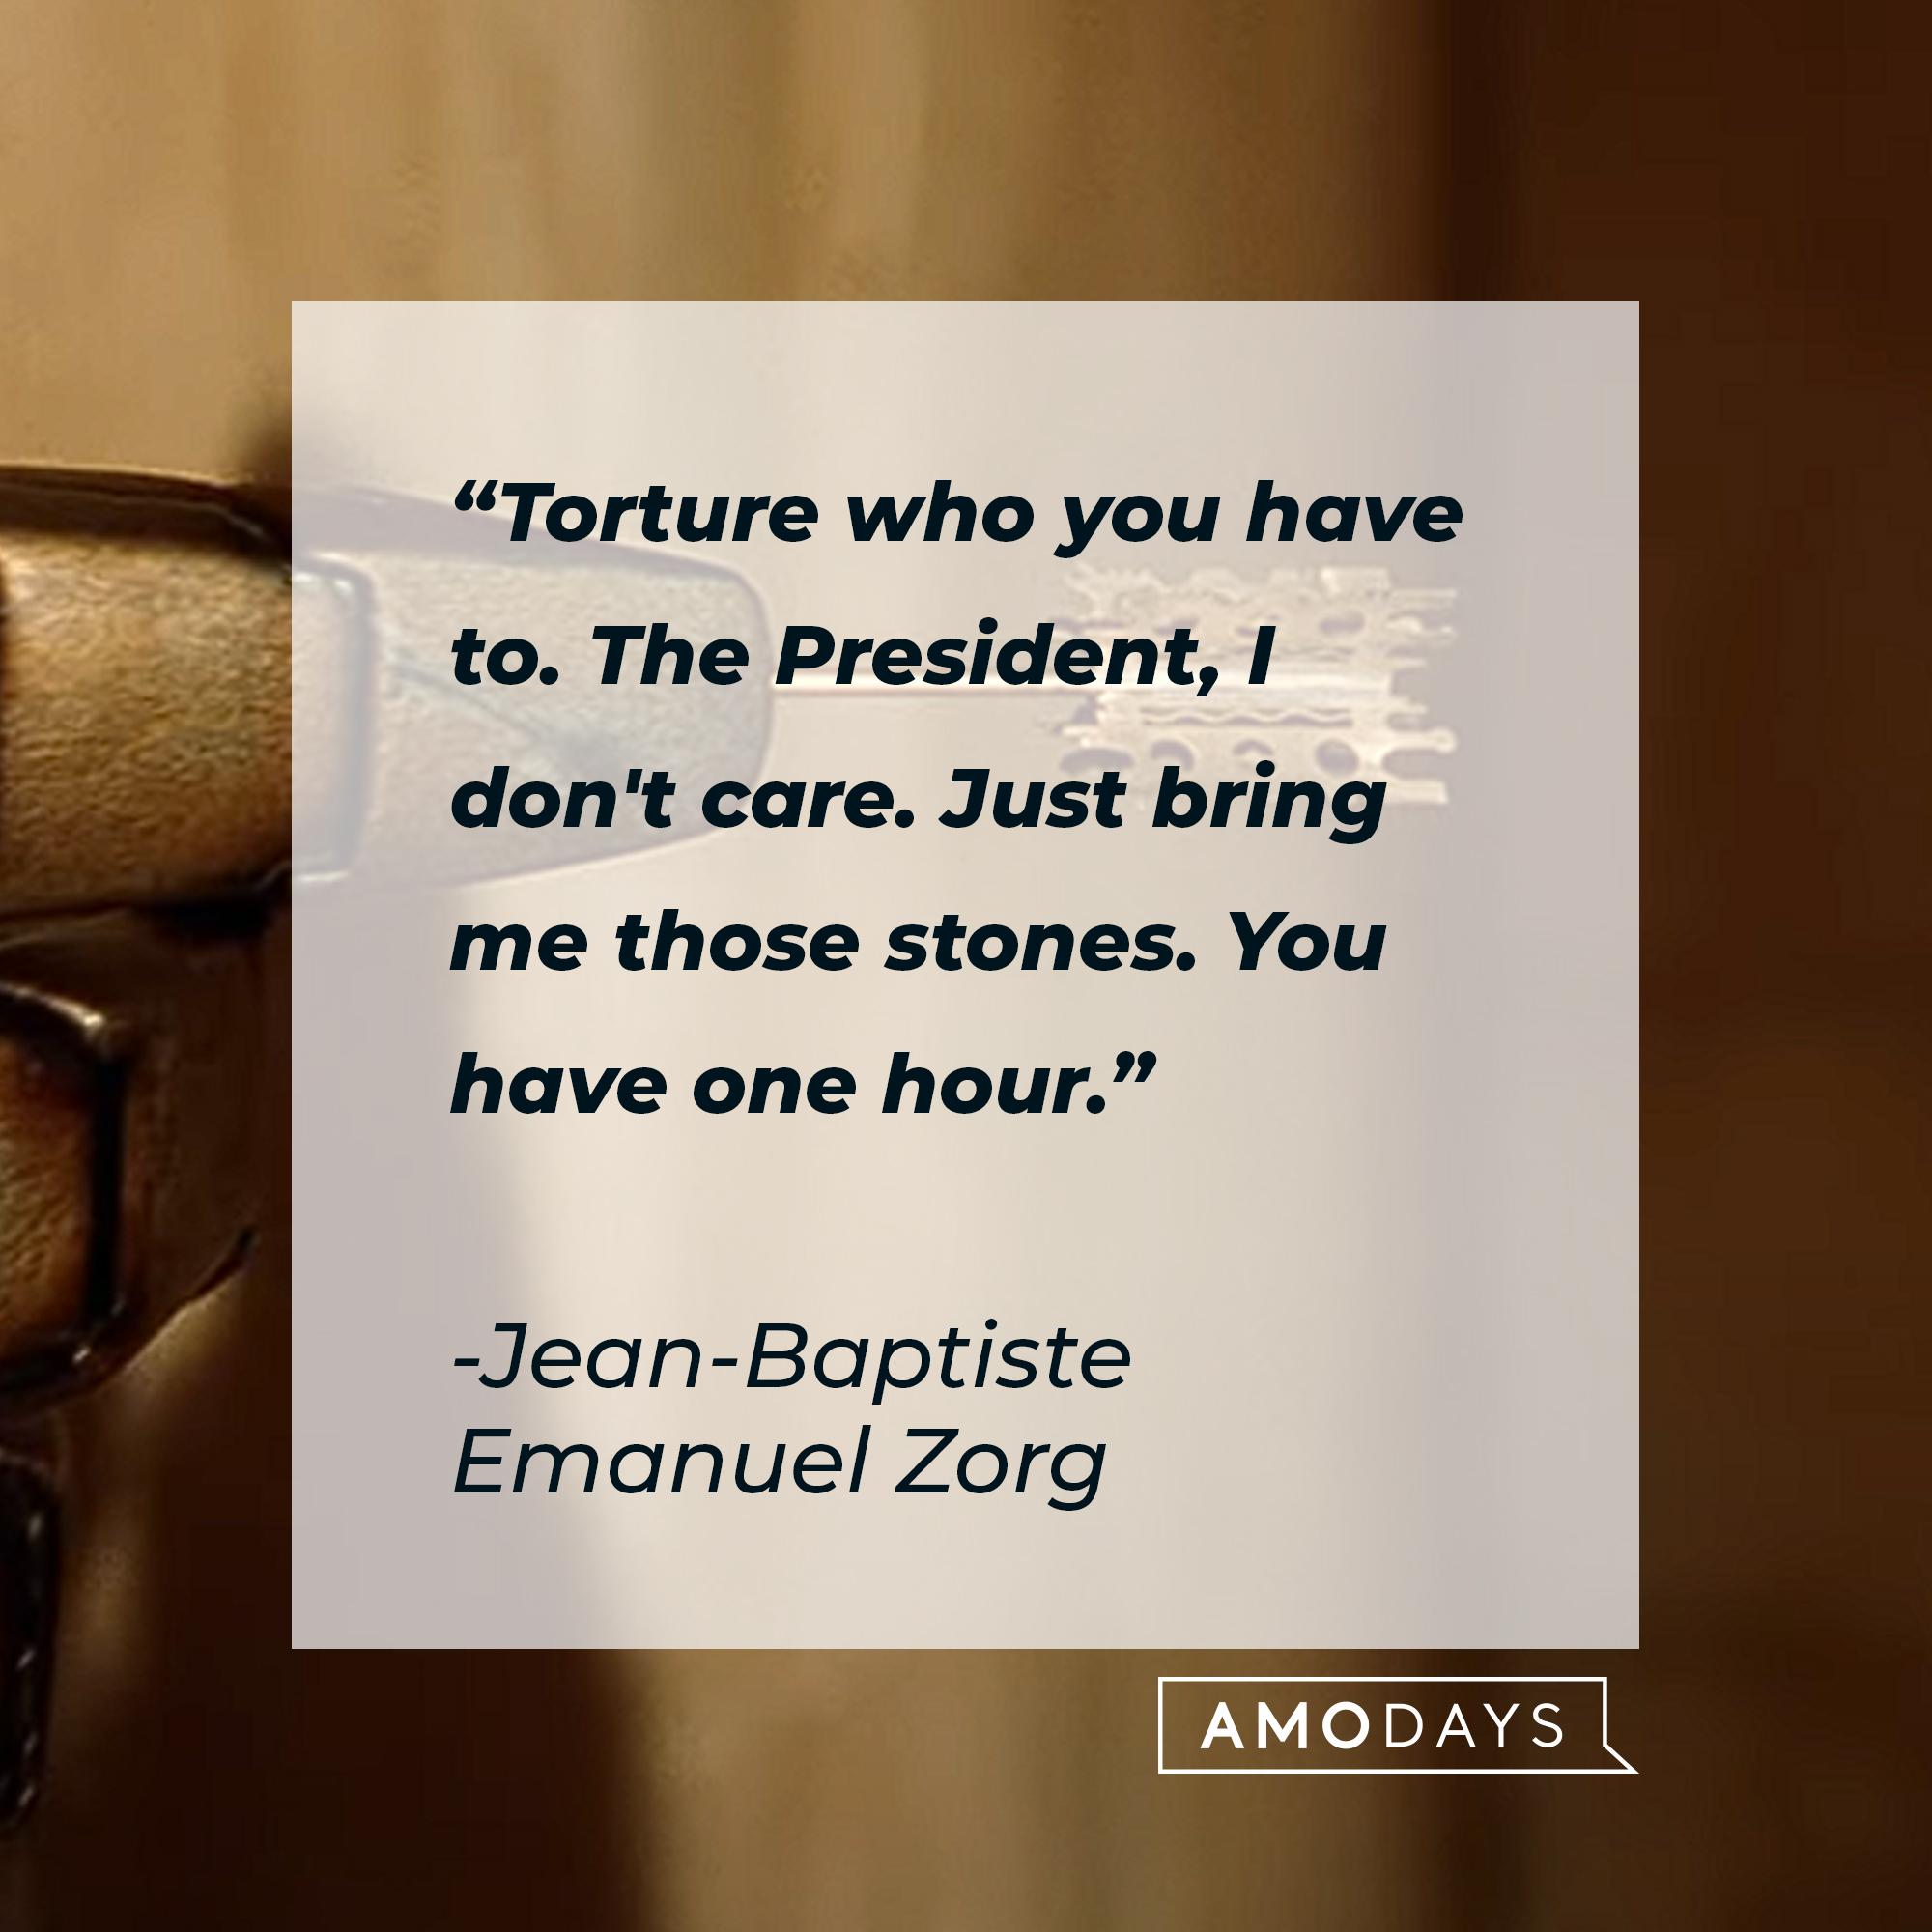 Jean-Baptiste Emanuel Zorg's quote: "Torture who you have to. The President, I don't care. Just bring me those stones. You have one hour." | Source: youtube.com/sonypictures